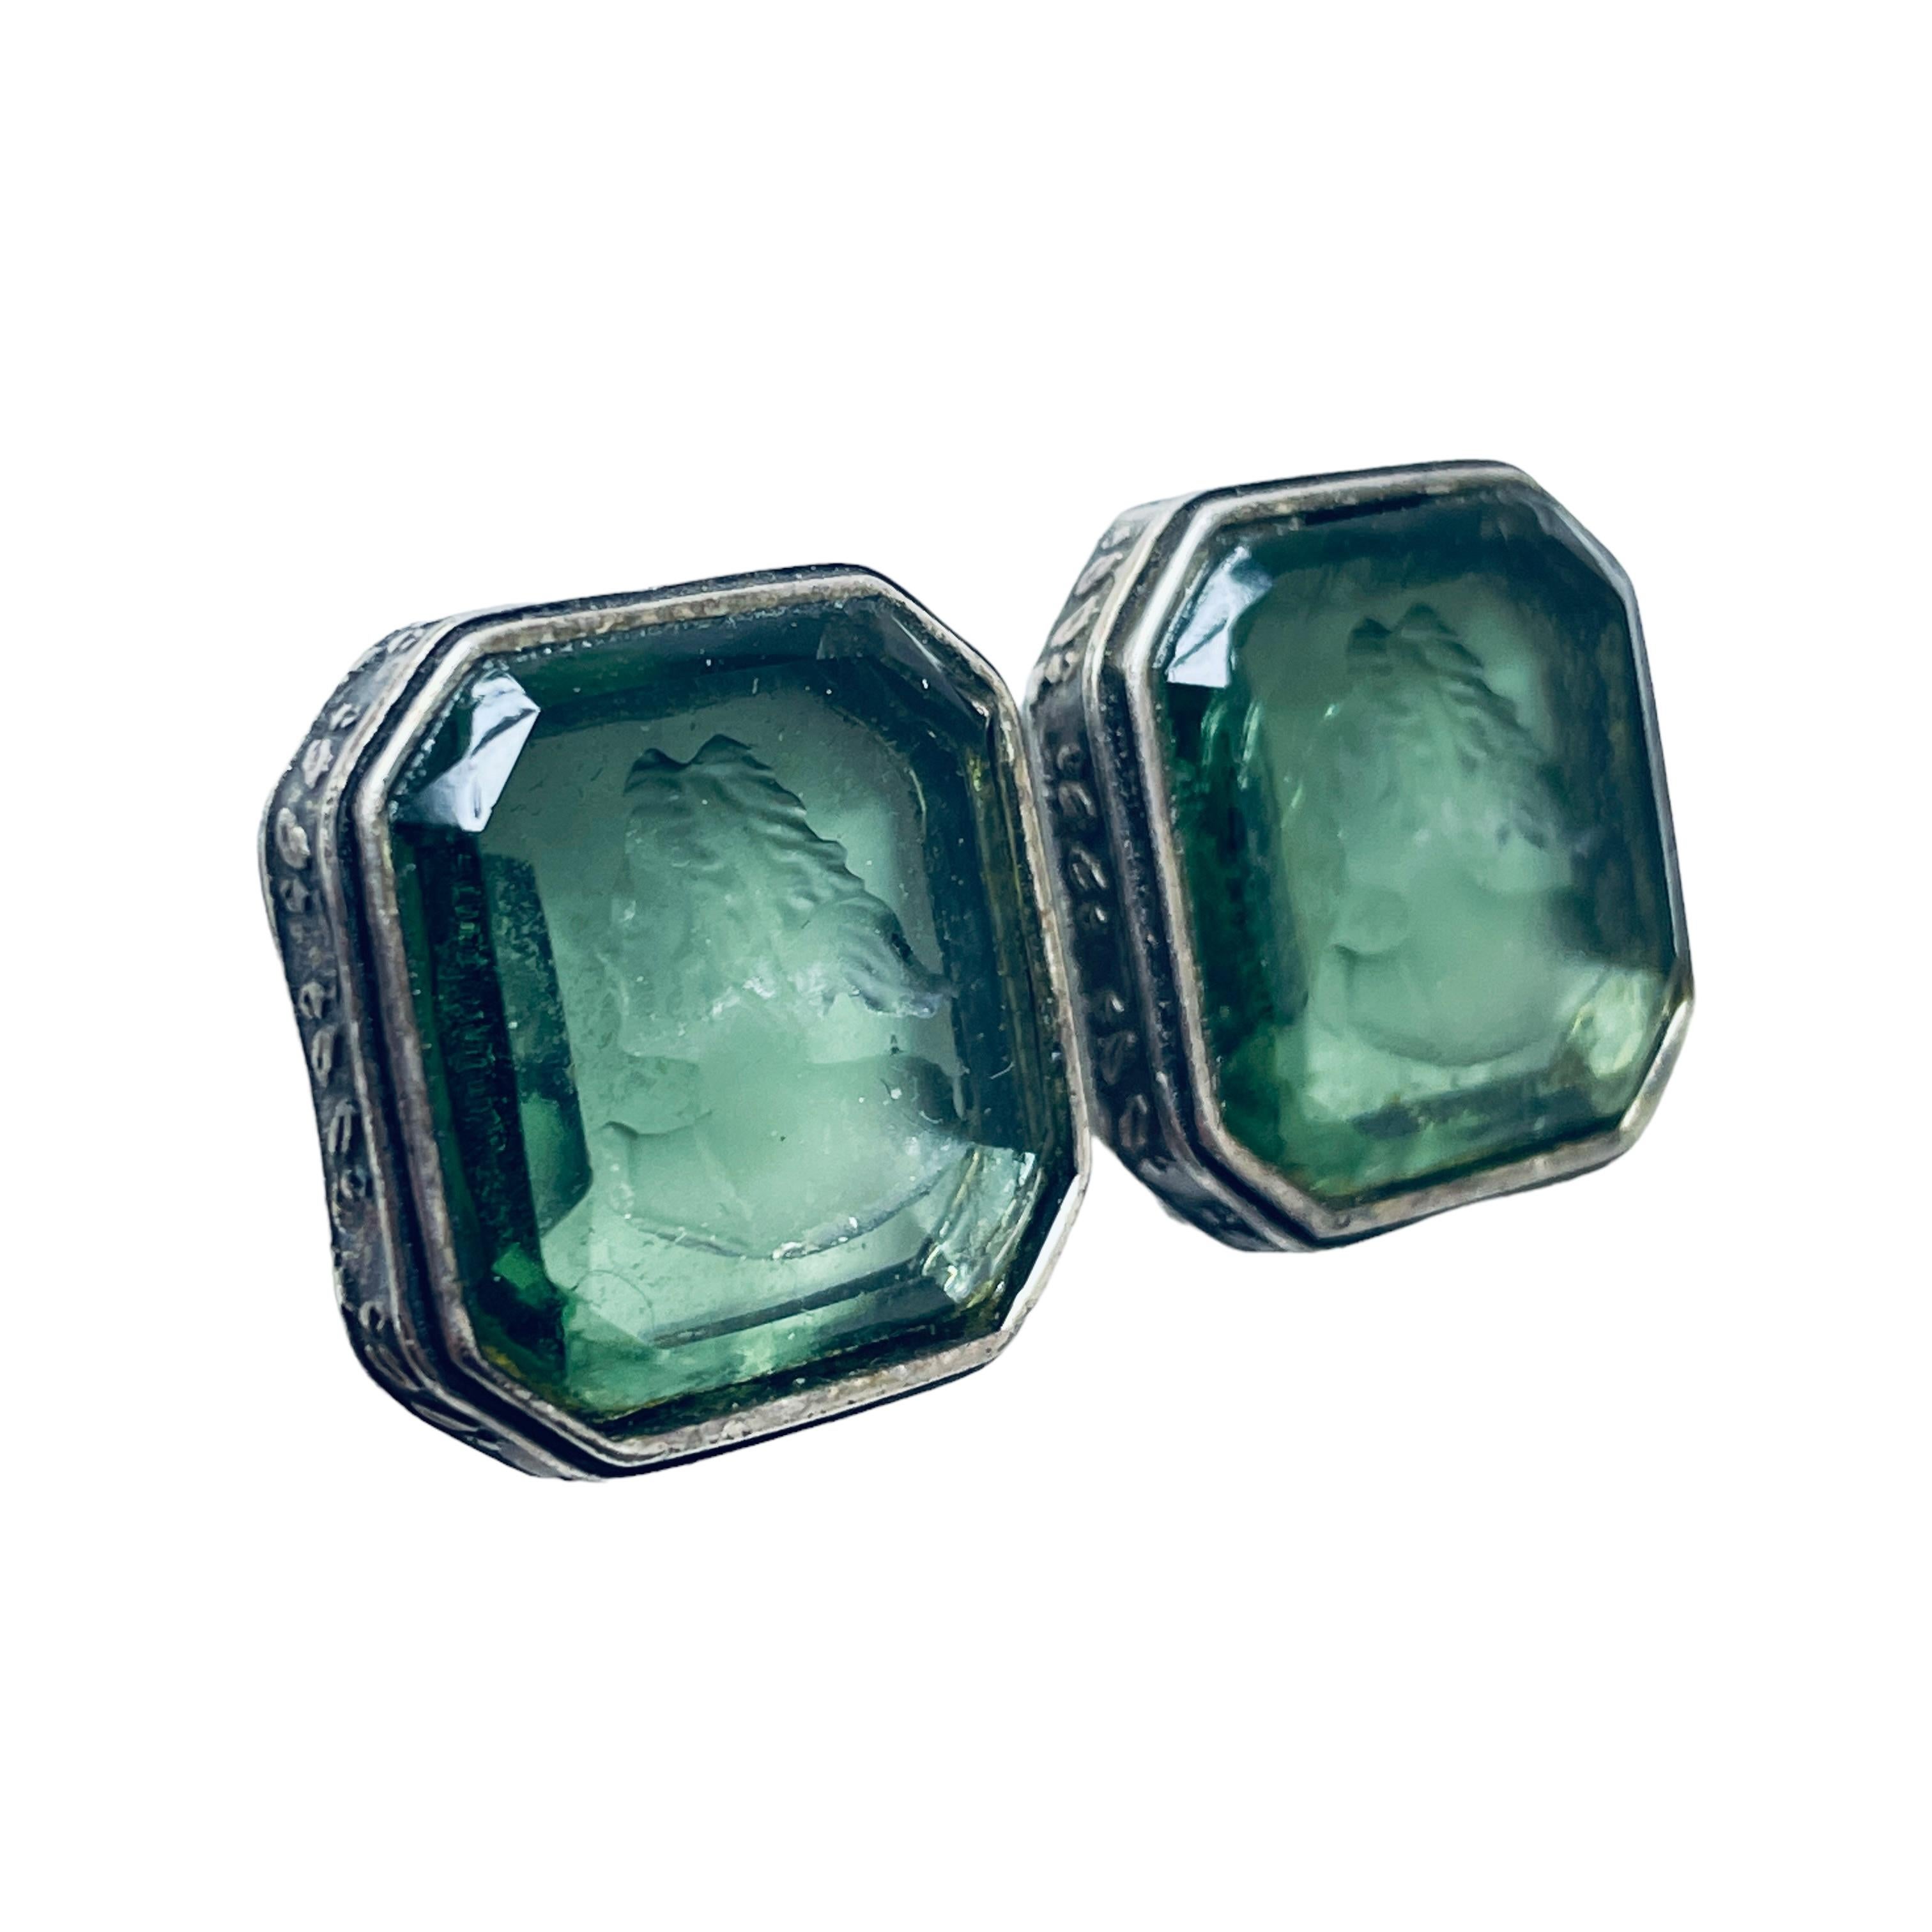 EXTASIA vintage silver tone green glass intaglio cameo designer clip on earrings For Sale 1